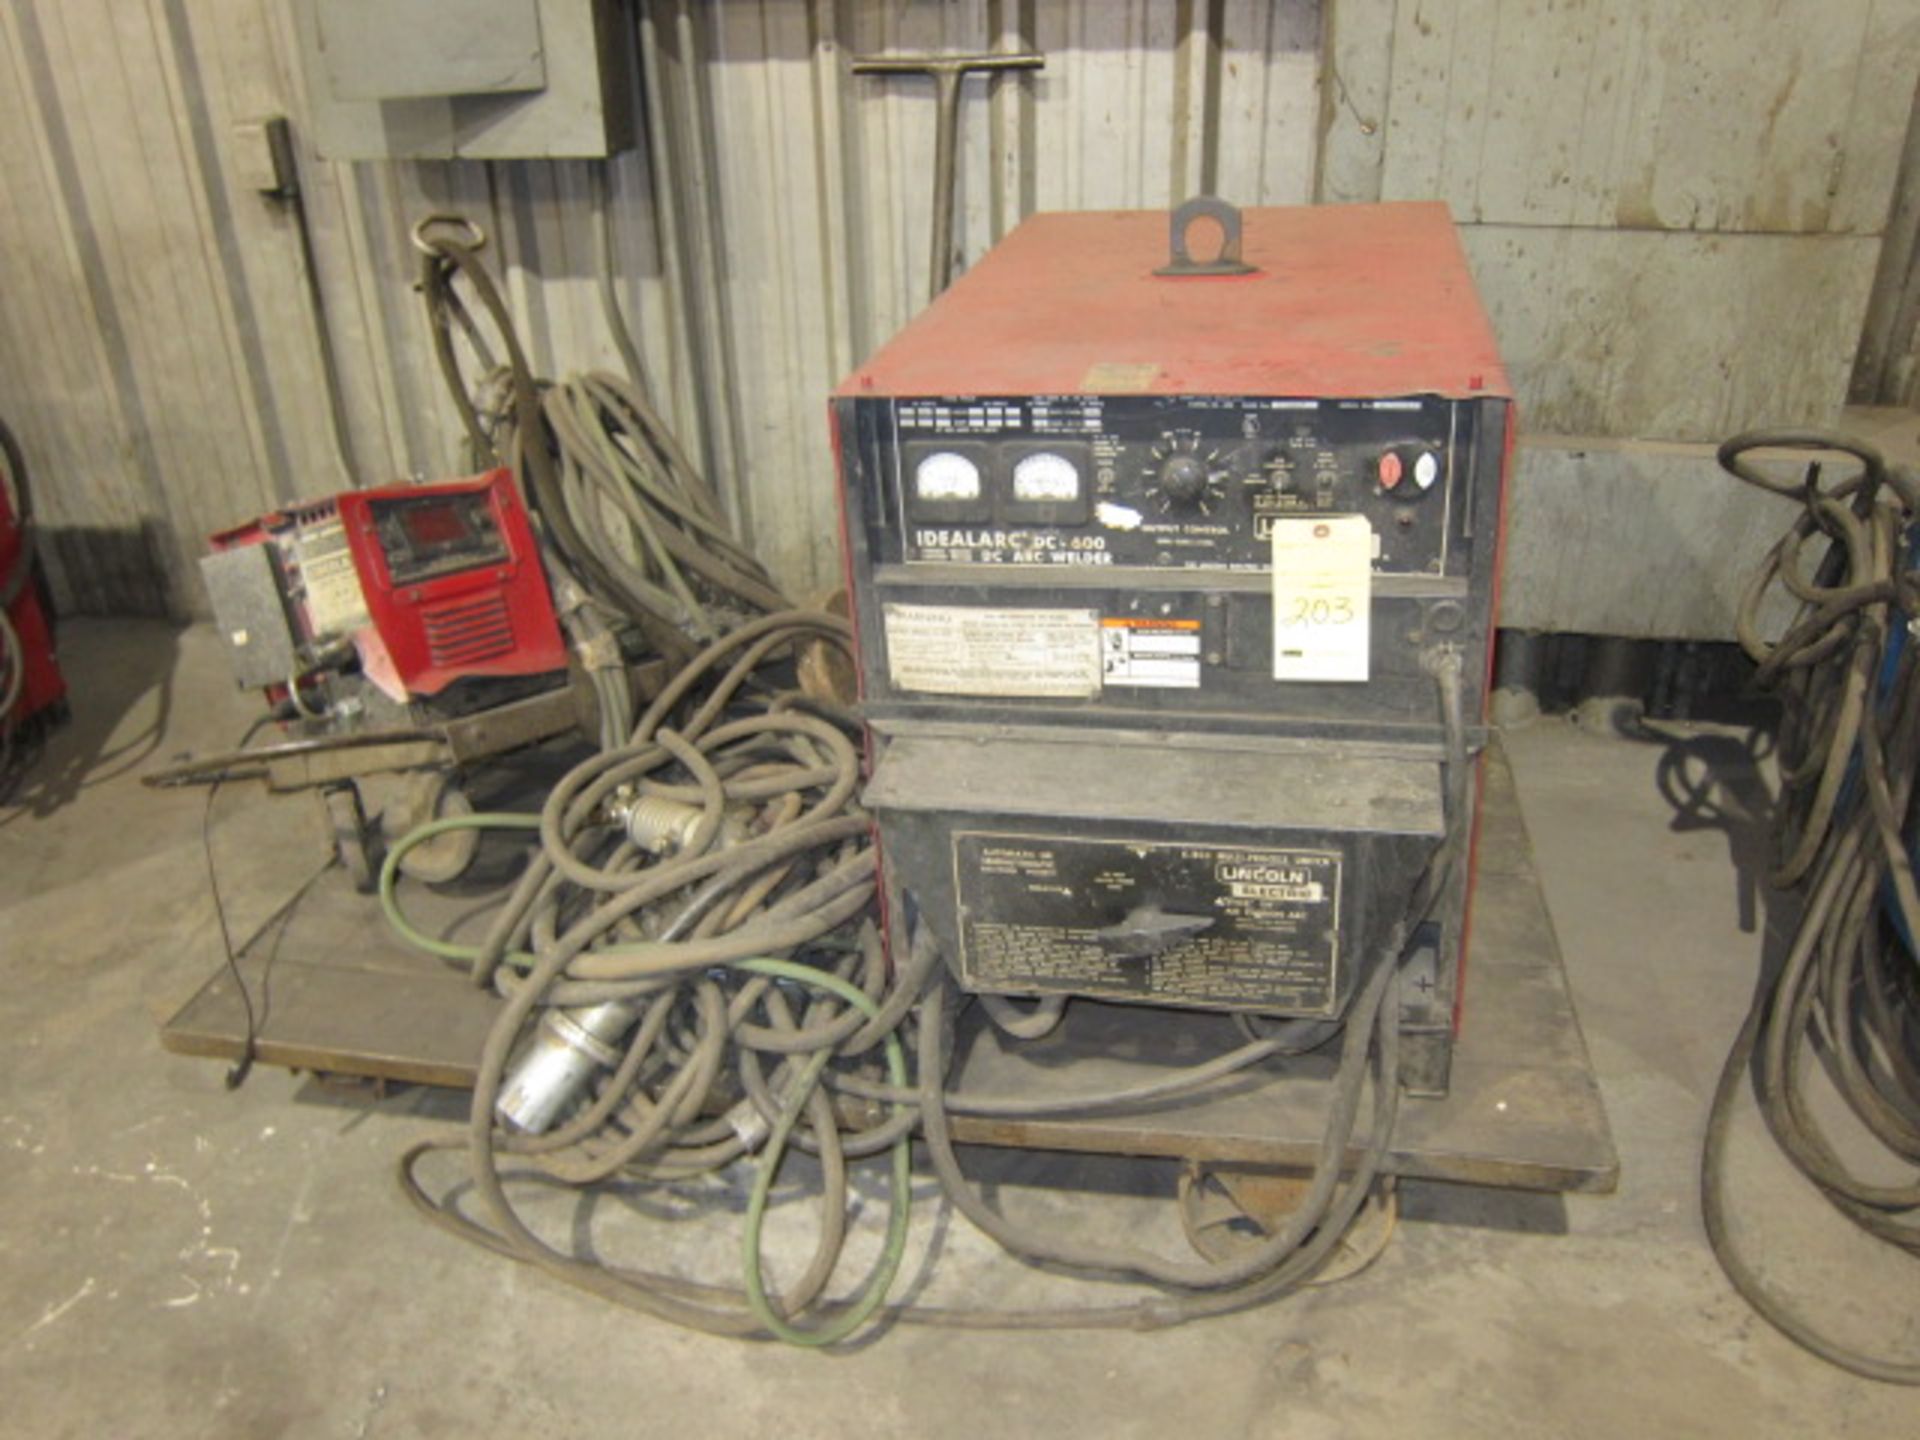 WELDING MACHINE, LINCOLN MDL. DC600, 600 amps @ 44 v., 100% duty cycle, wire feeder, S/N AC782320